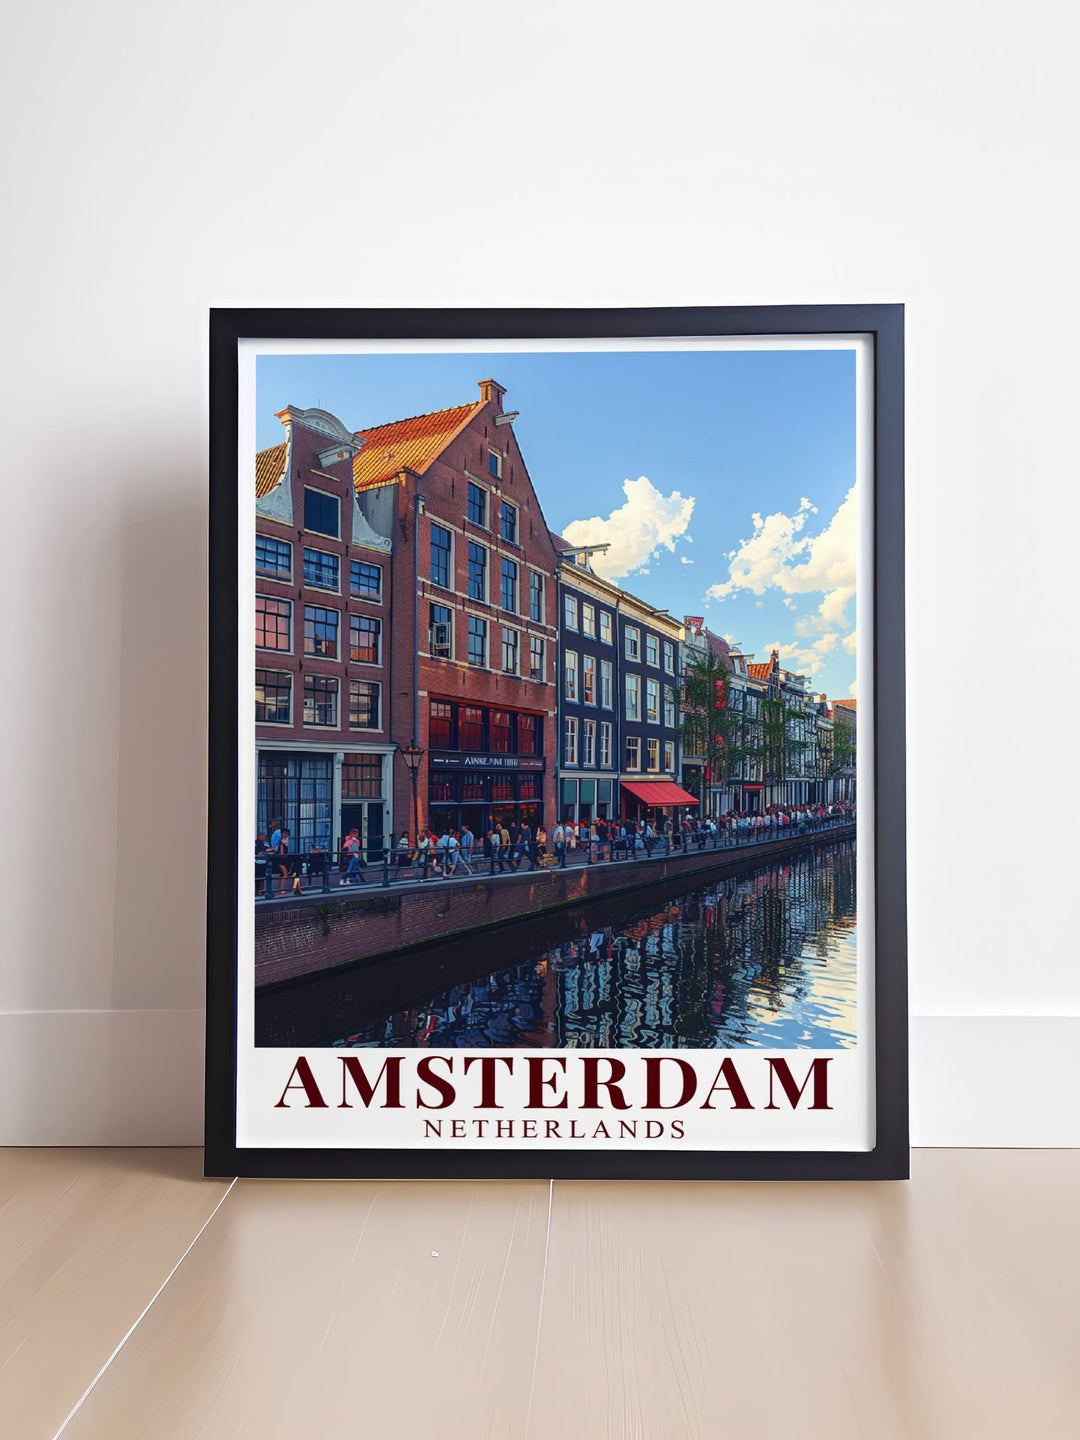 Stunning Anne Frank House travel poster from Amsterdam. This Amsterdam wall art captures the essence of the citys rich history and iconic landmarks. Perfect for home decor and as a thoughtful gift for friends and family.